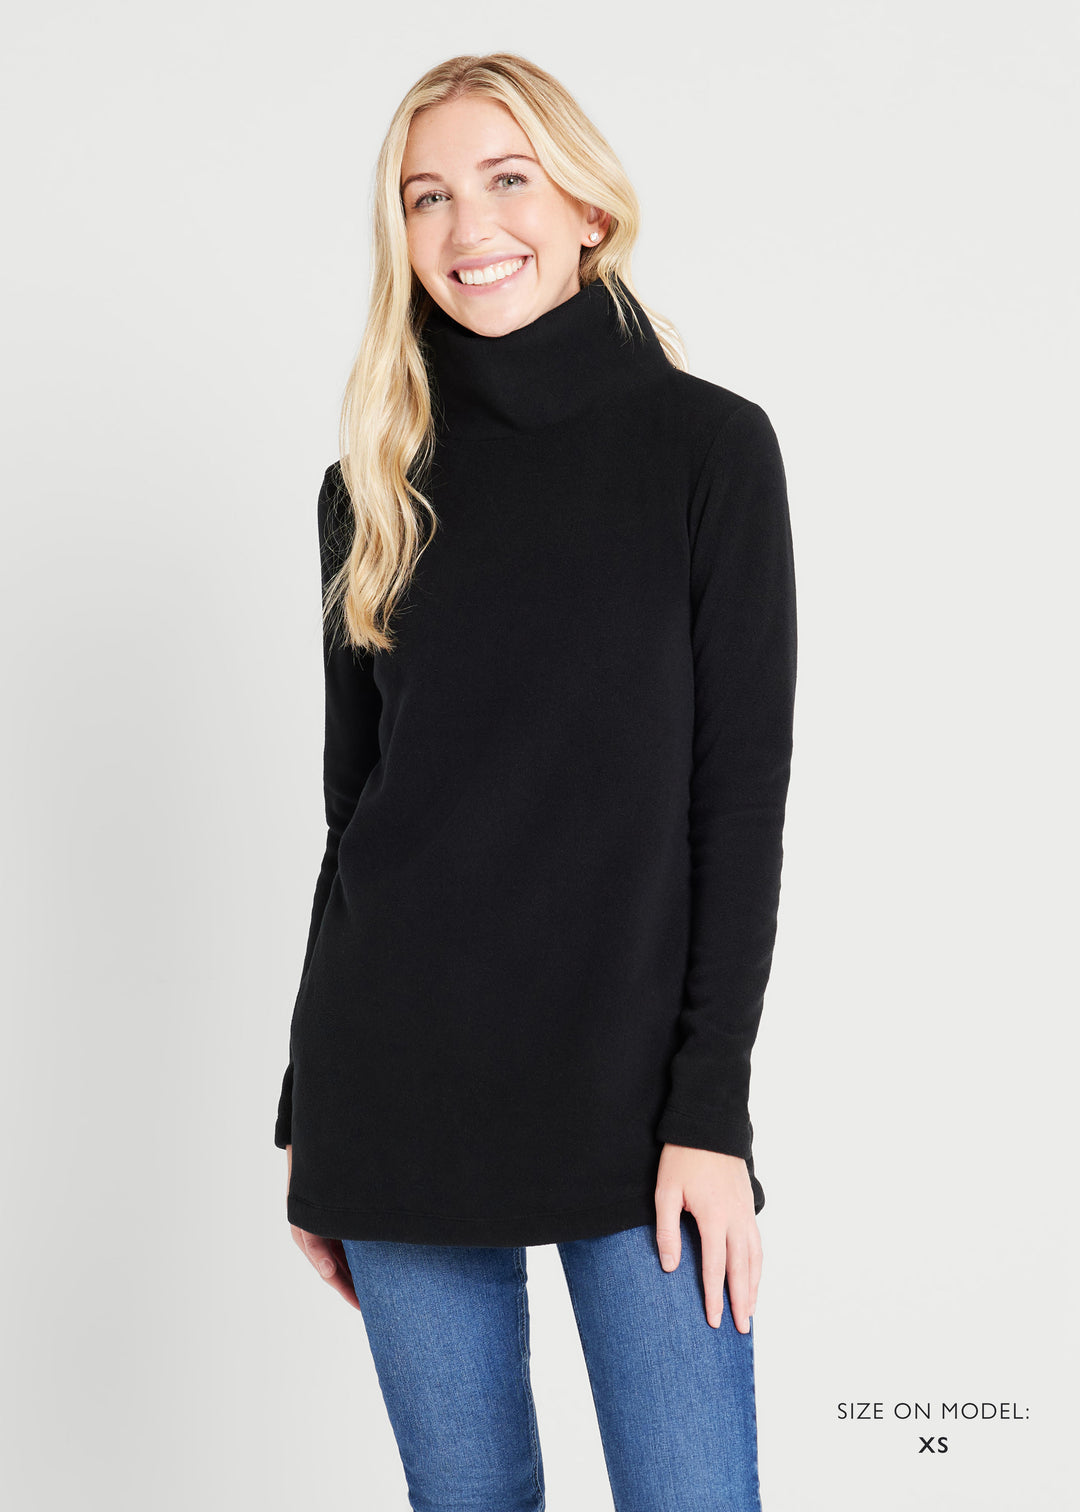 Womens Winter Fleece Tunic Tops to Wear with Leggings Sweaters for